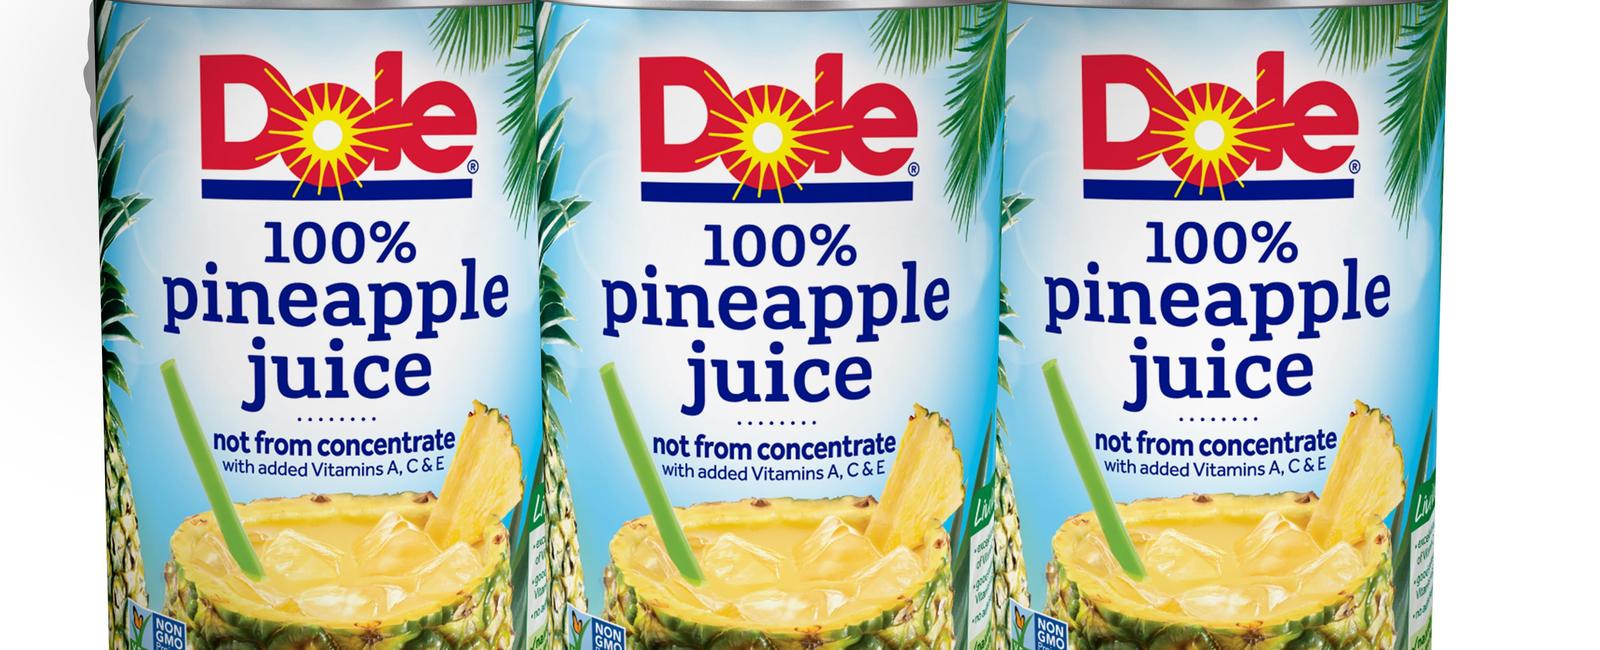 Which type of fruit juice did dole sell first pineapple